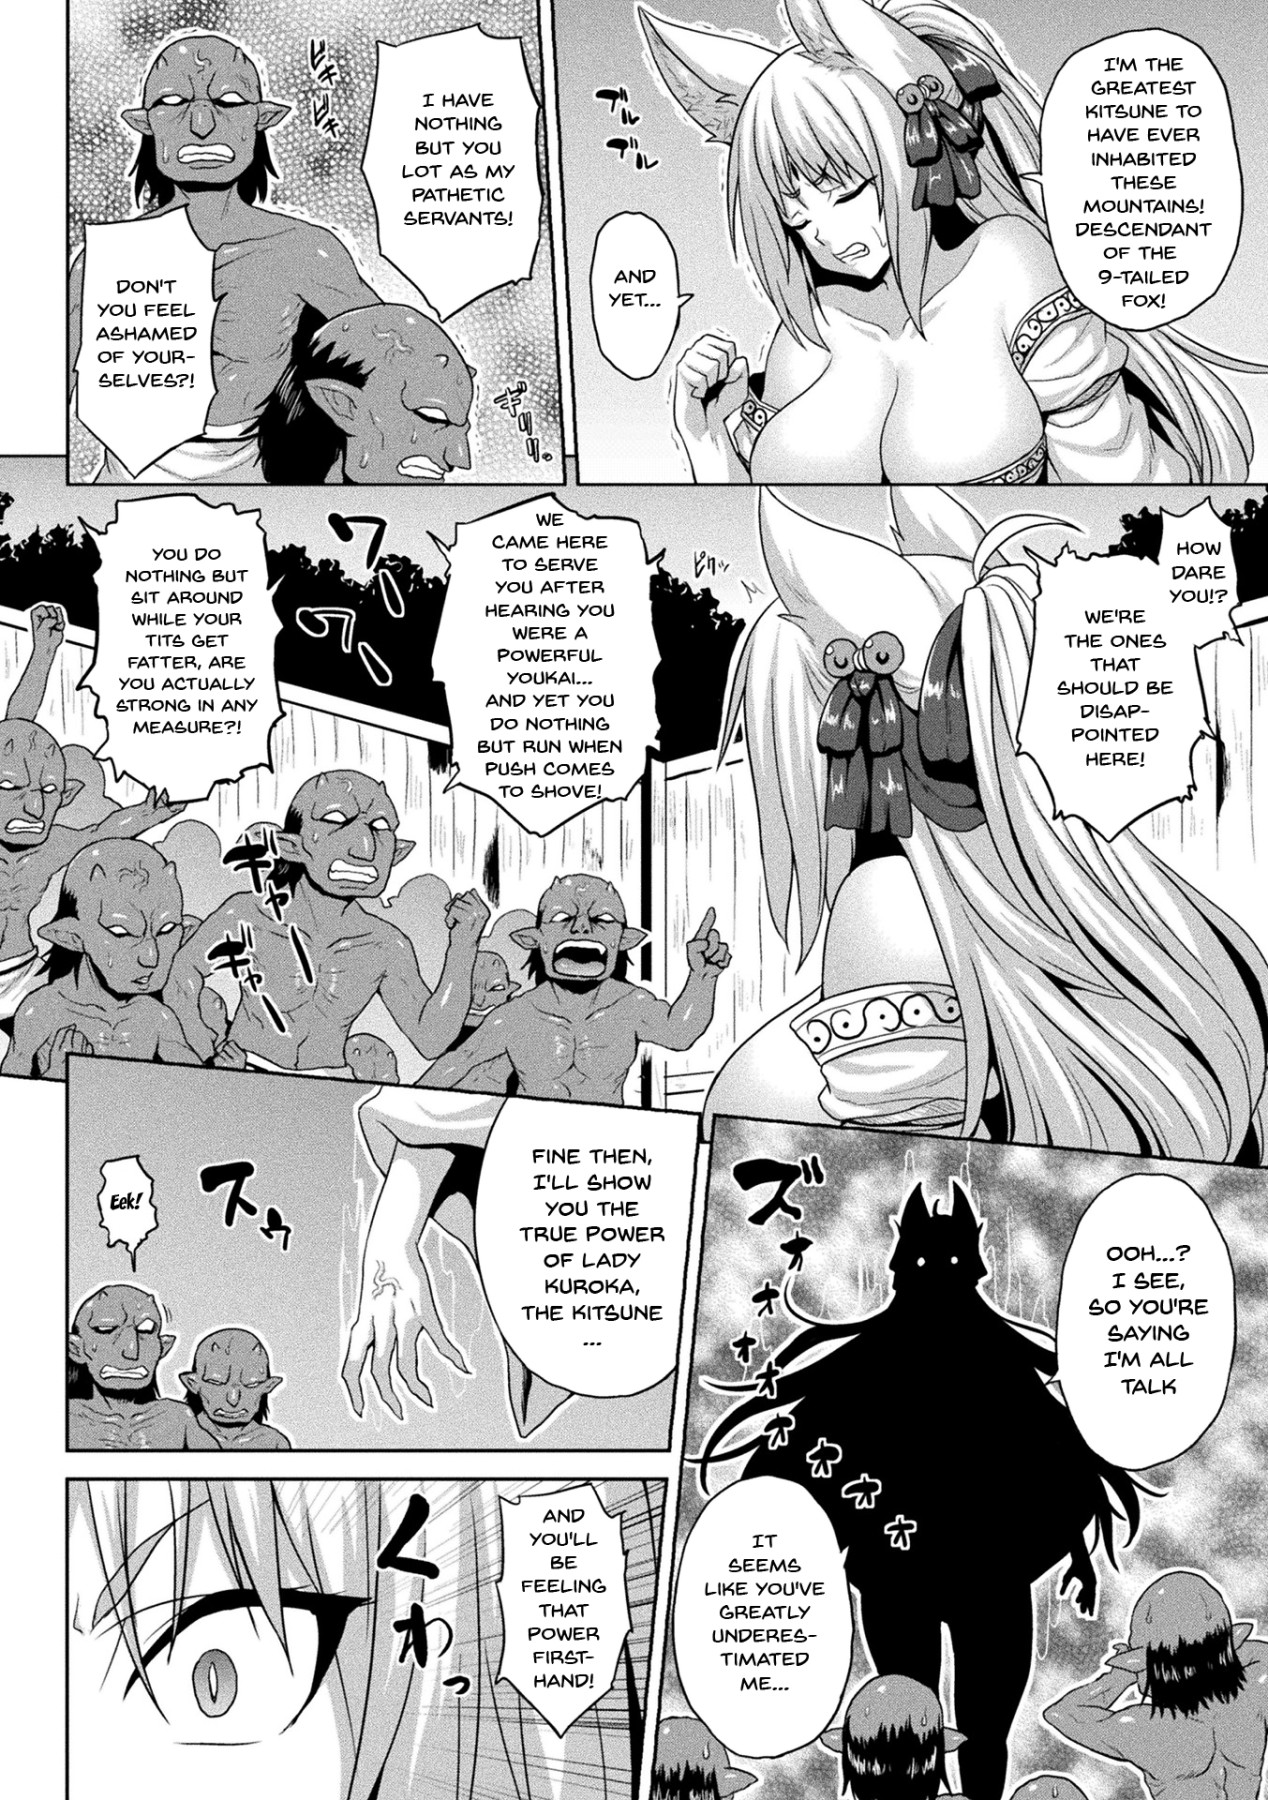 Hentai Manga Comic-The Woman Who's Fallen Into Being a Slut In Defeat-Chapter 5-2